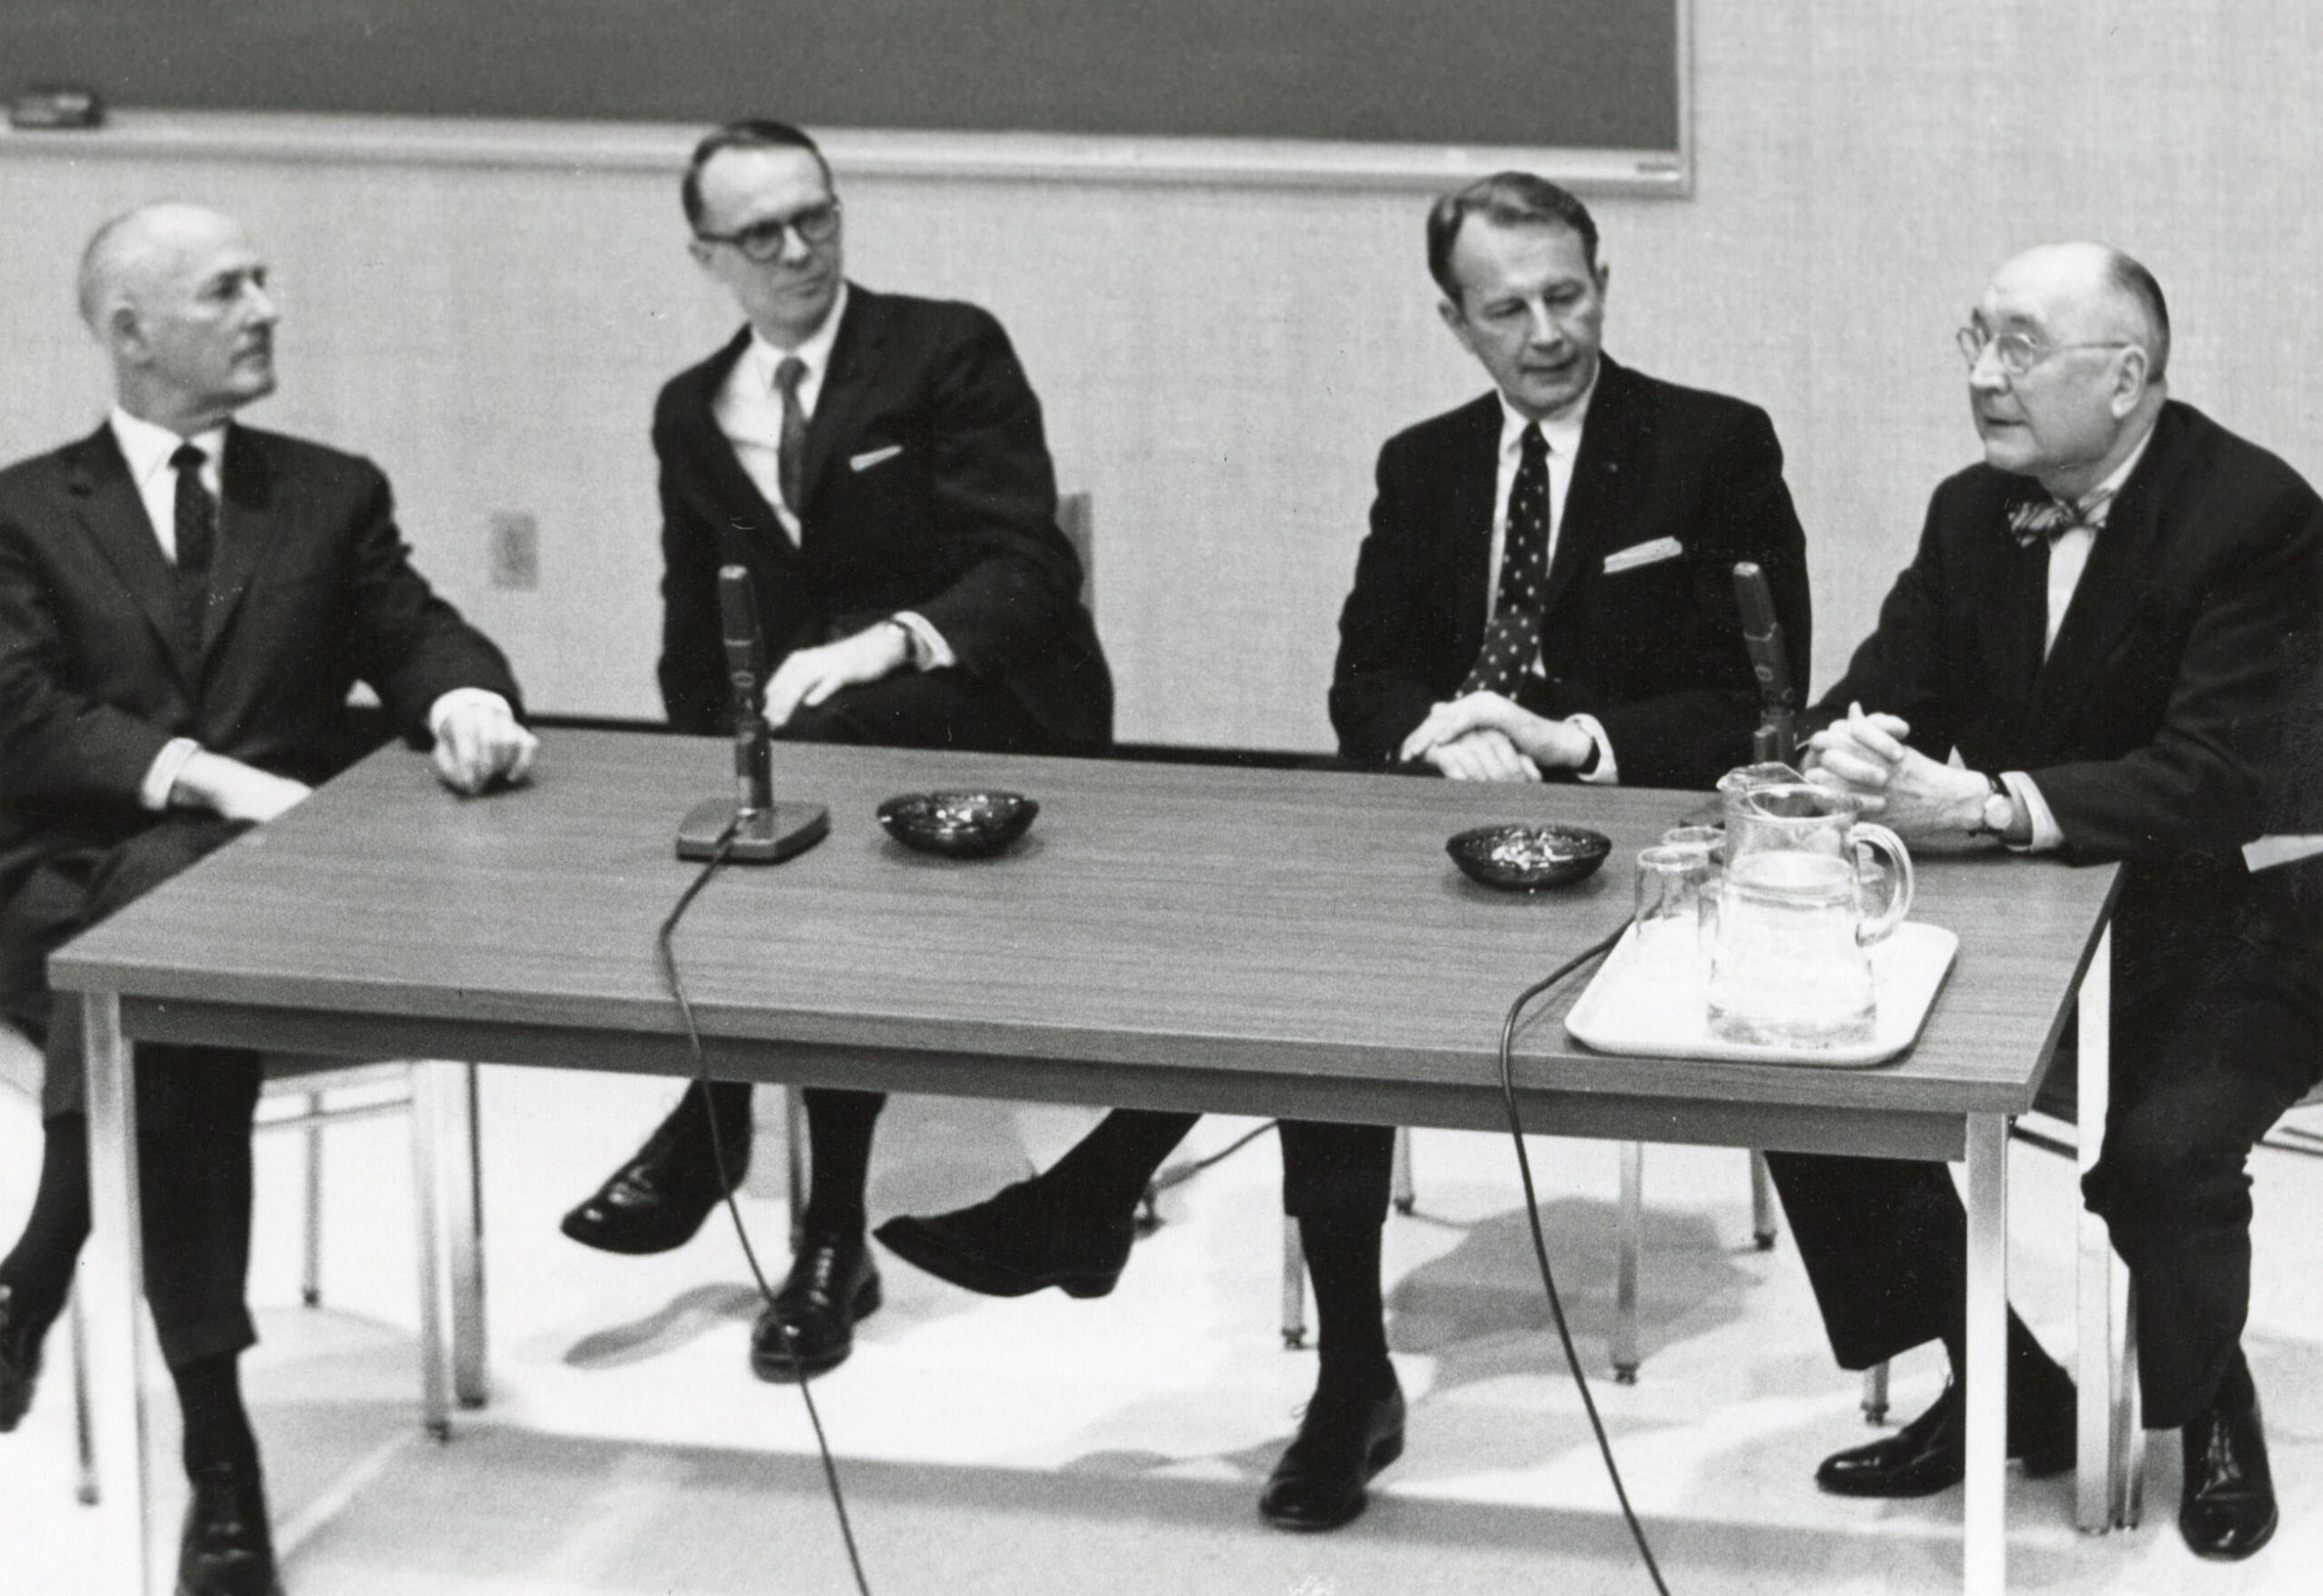 In 1969&comma; college of medicine organizers recognized a centennial to mark 100 years since the beginning of medical education in Omaha&period; Included in the centennial events was a symposium to discuss the future of medicine that featured George Beadle&comma; at left&comma; PhD&comma; a Wahoo&comma; Nebraska&comma; native who shared the 1958 Nobel Prize for Physiology&sol;Medicine&period;